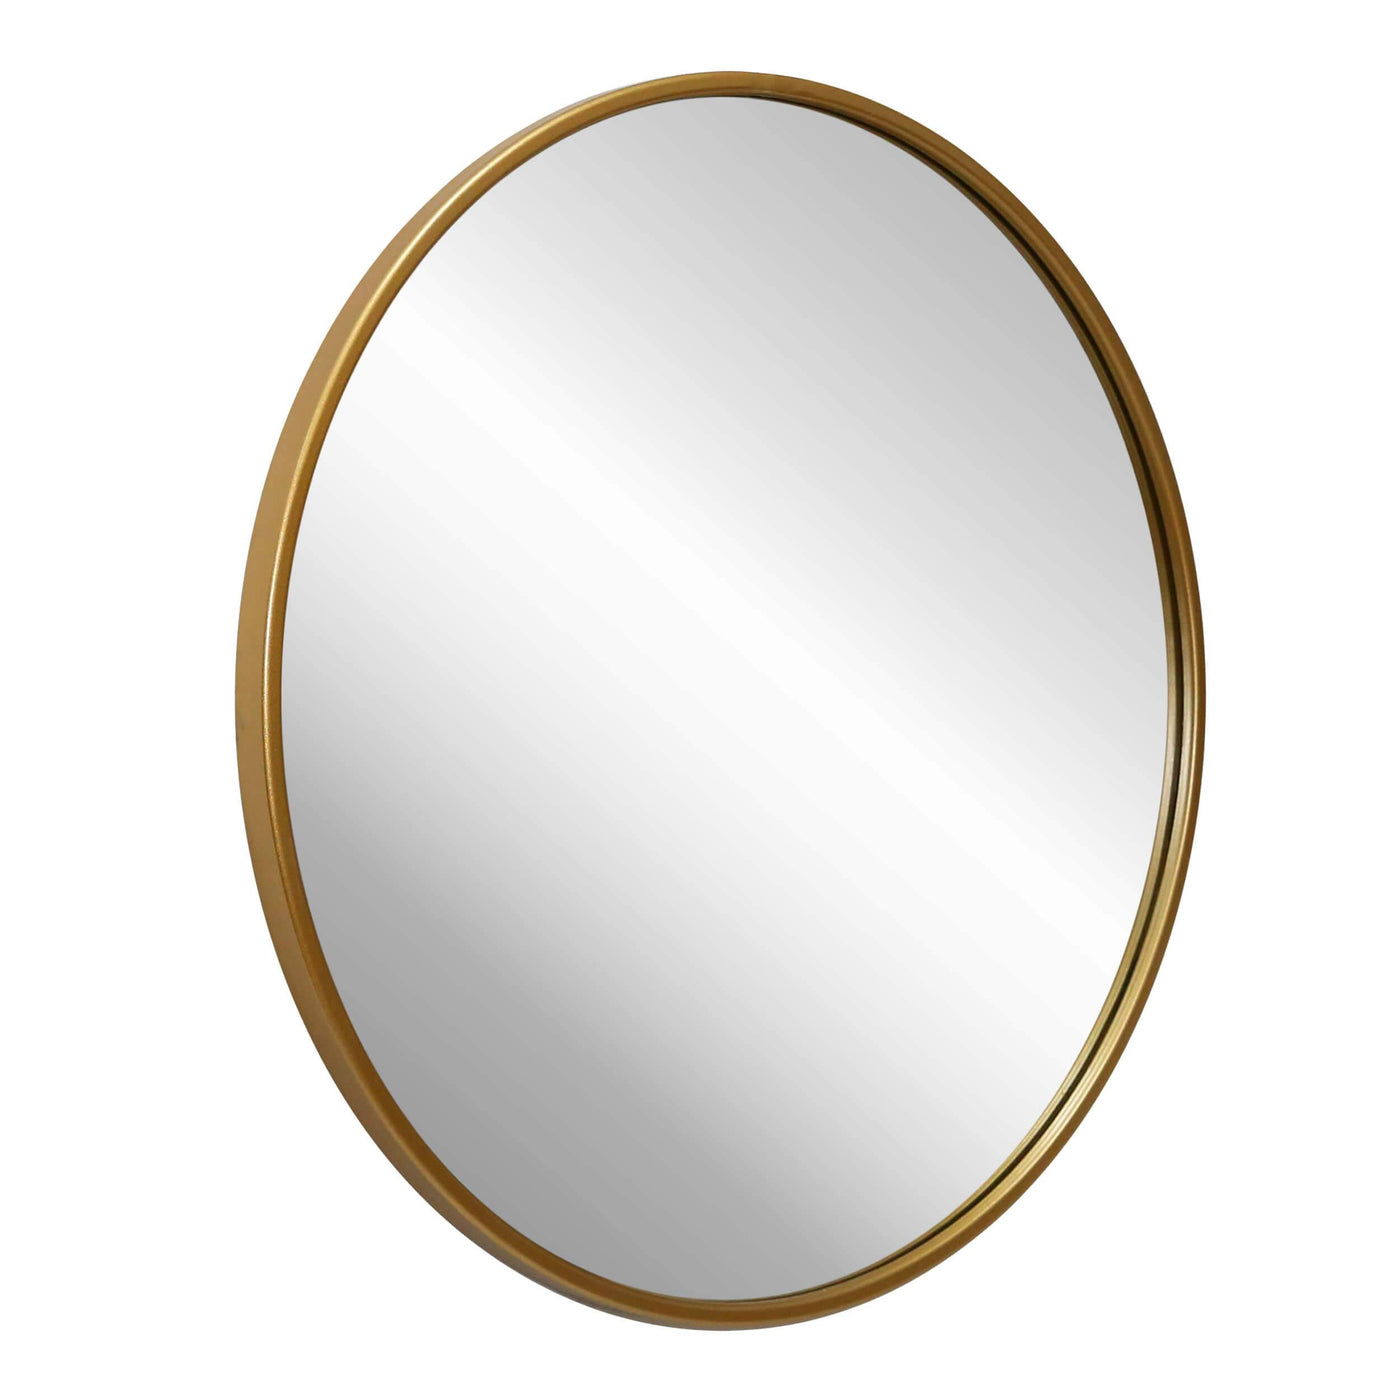 20" Round Wall Mirror for Entryways, Washrooms and Living Rooms